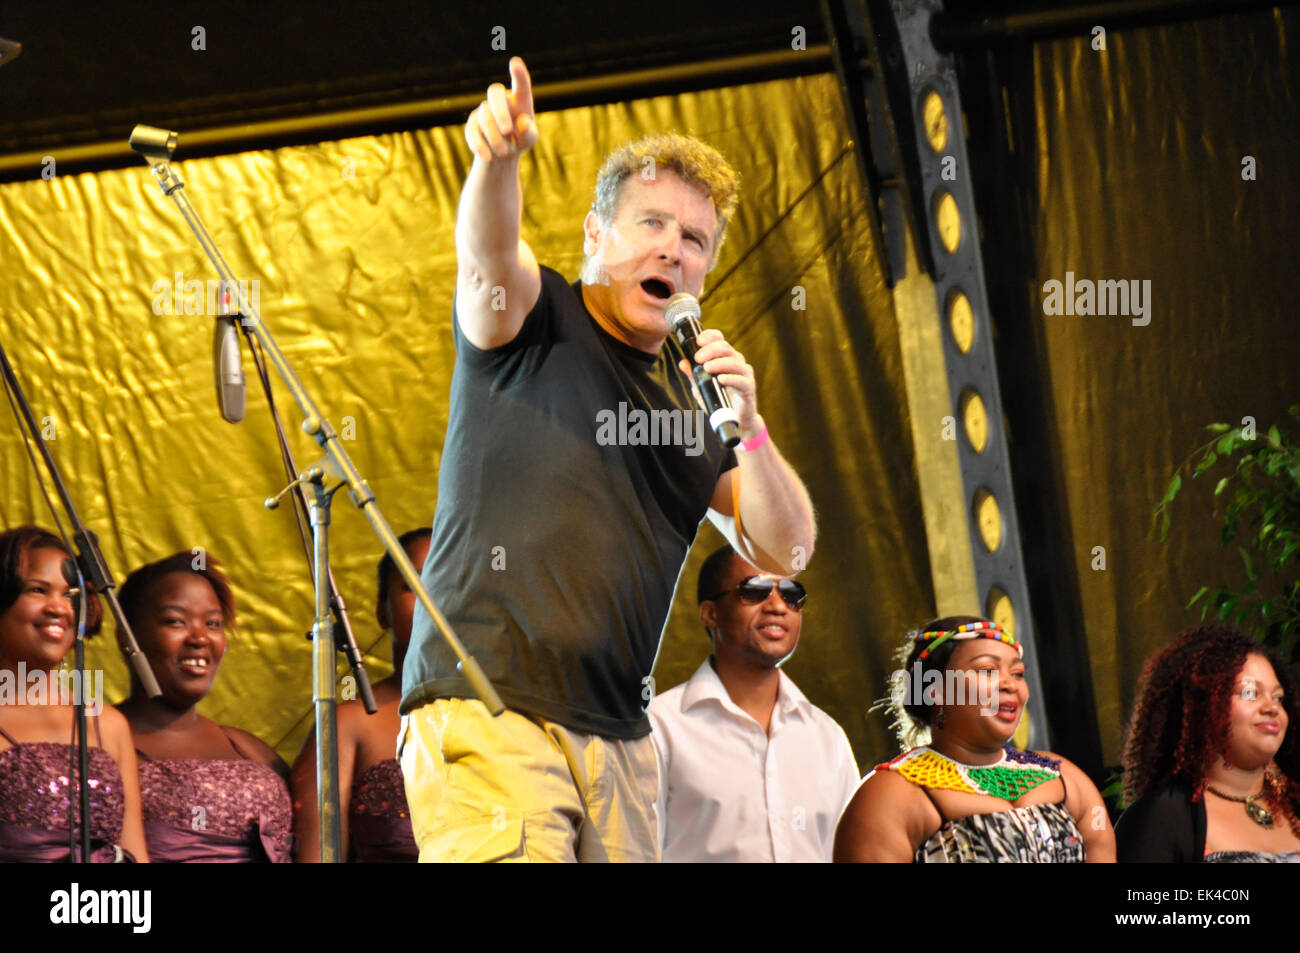 South African musician Johnny Clegg, sang “Asimbonanga” at memorial concert for Mandela in Cape Town. Cape Town. Crowds danced and sang to Johnny Clegg, Freshly Ground, Annie Lennox, Bala brothers and more. Speakers included minister Trevor Manual and Premier of the Western cape Helen Zille.The feeling was one of joy and unityat the Cape Town Stadium for the rainbow nation as all races, ages and gender attended the tribute for Mandela. Stock Photo